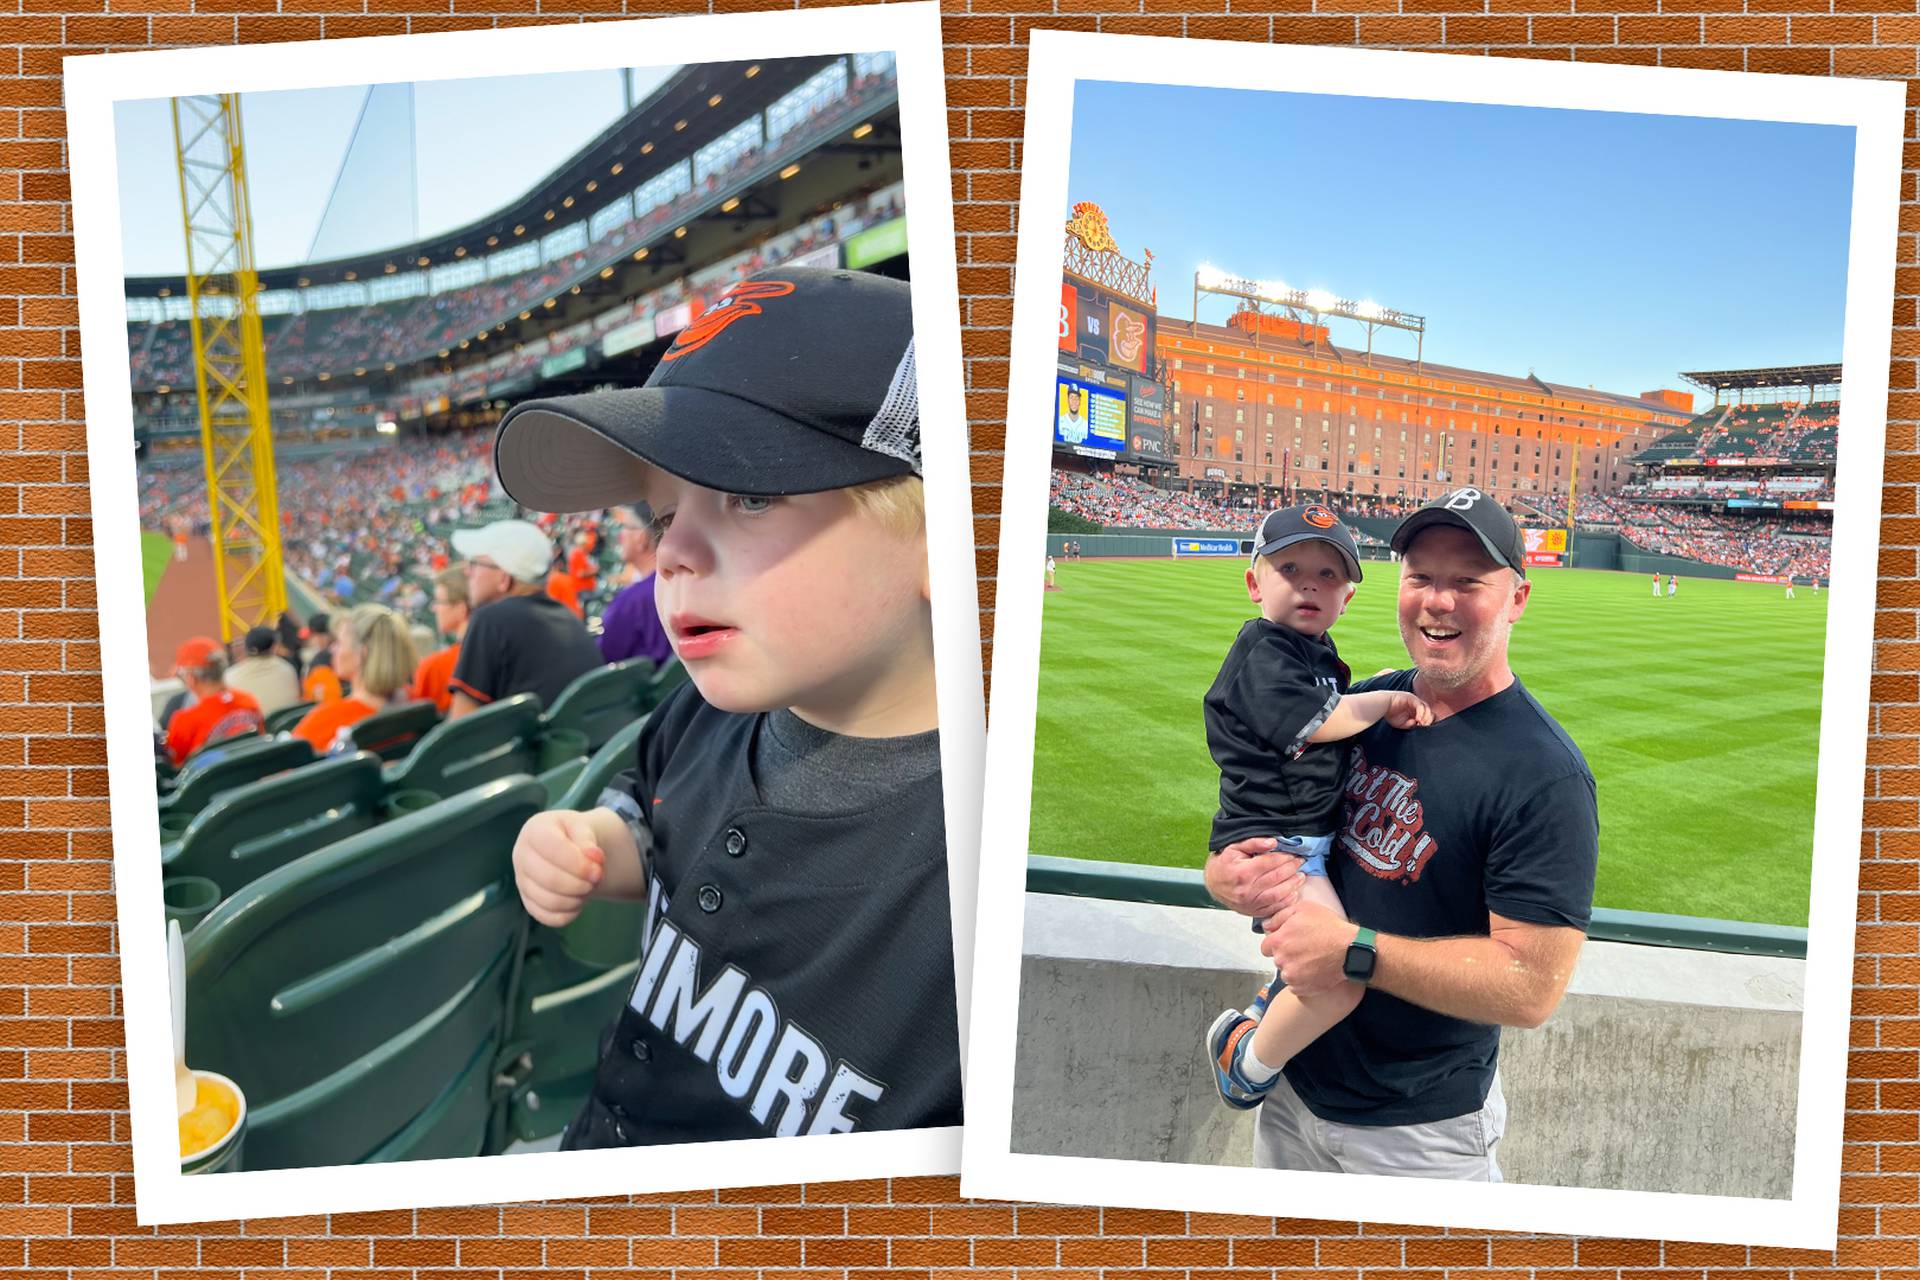 Author Michael Graff and his son visited Camden Yards during the late-season series against the Rays.